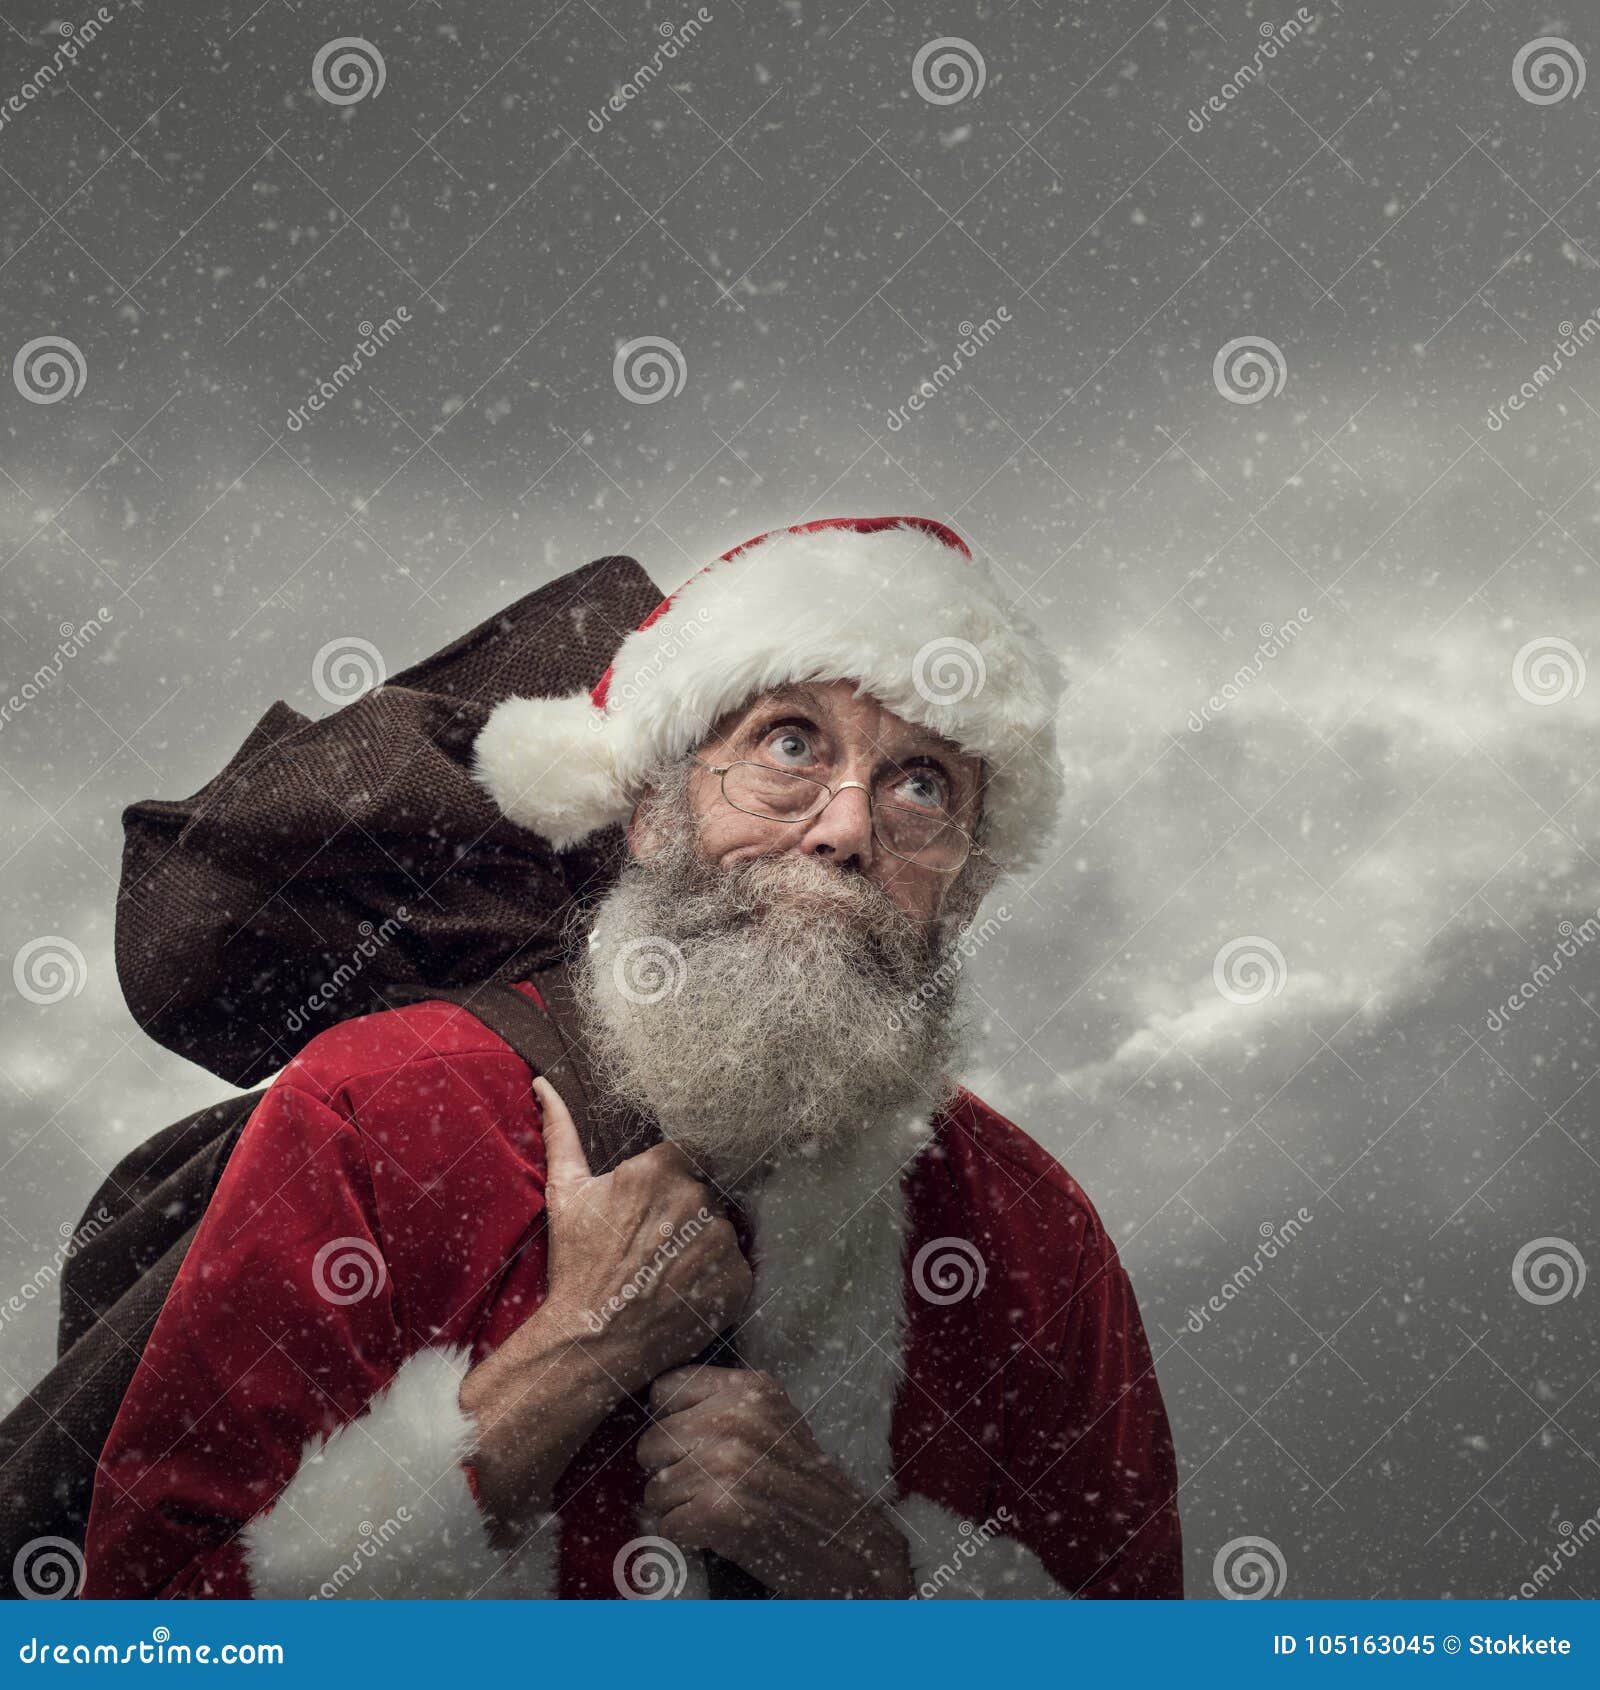 Santa Claus Carrying Christmas Gifts Stock Image - Image of gifts ...